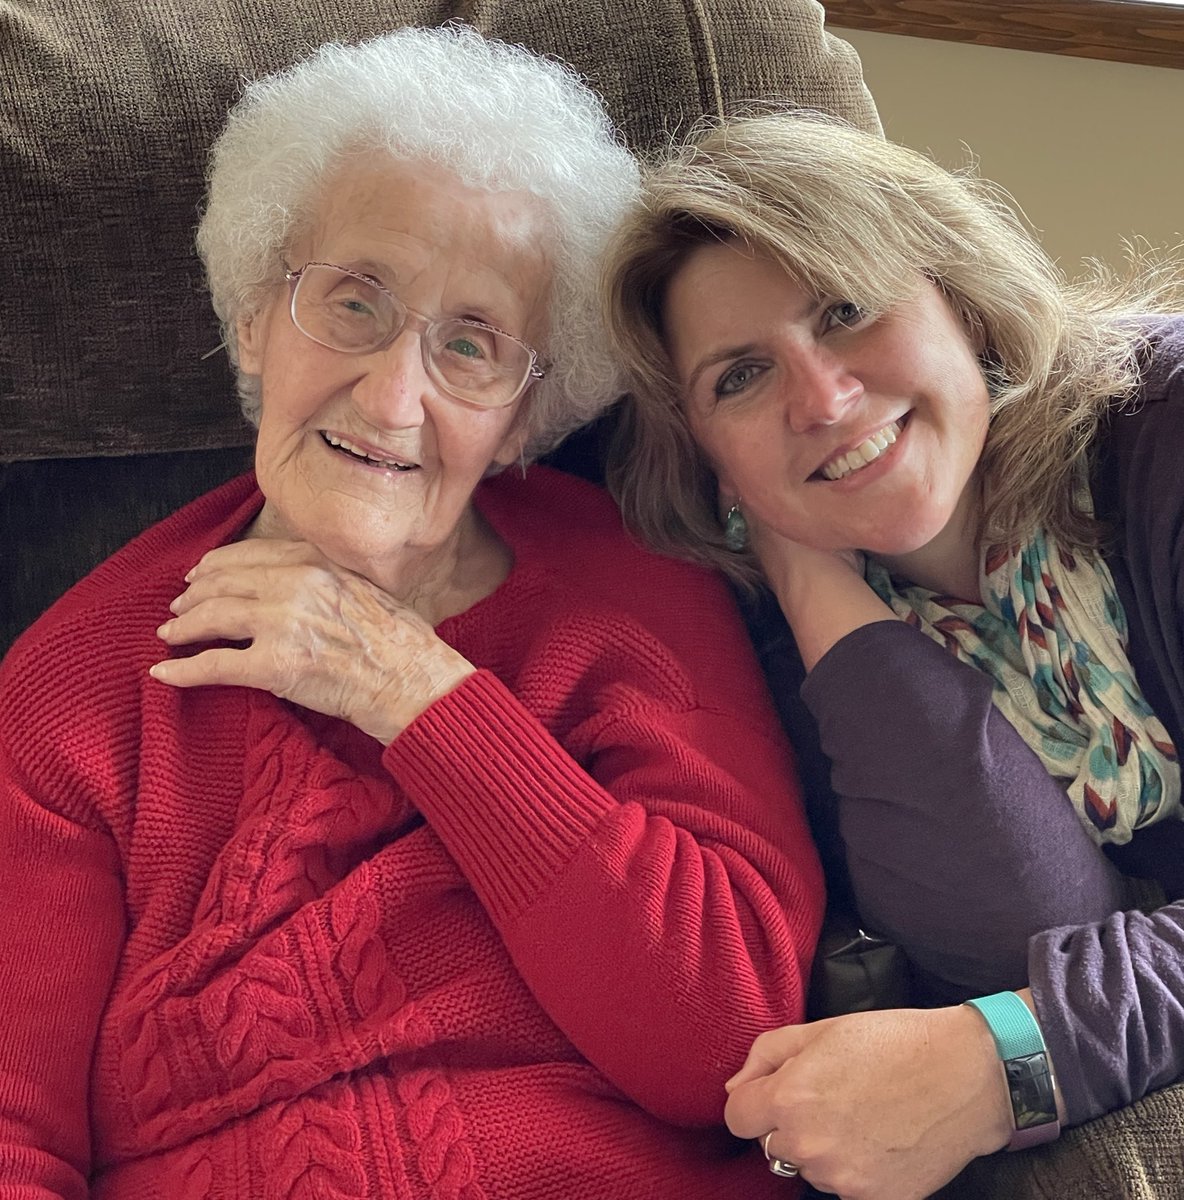 Wishing my amazing grandmother a happy 103rd birthday today. Now working my way to Oregon so I can play with her in person!  #truematriarch #storiestotell #loveandgratitude